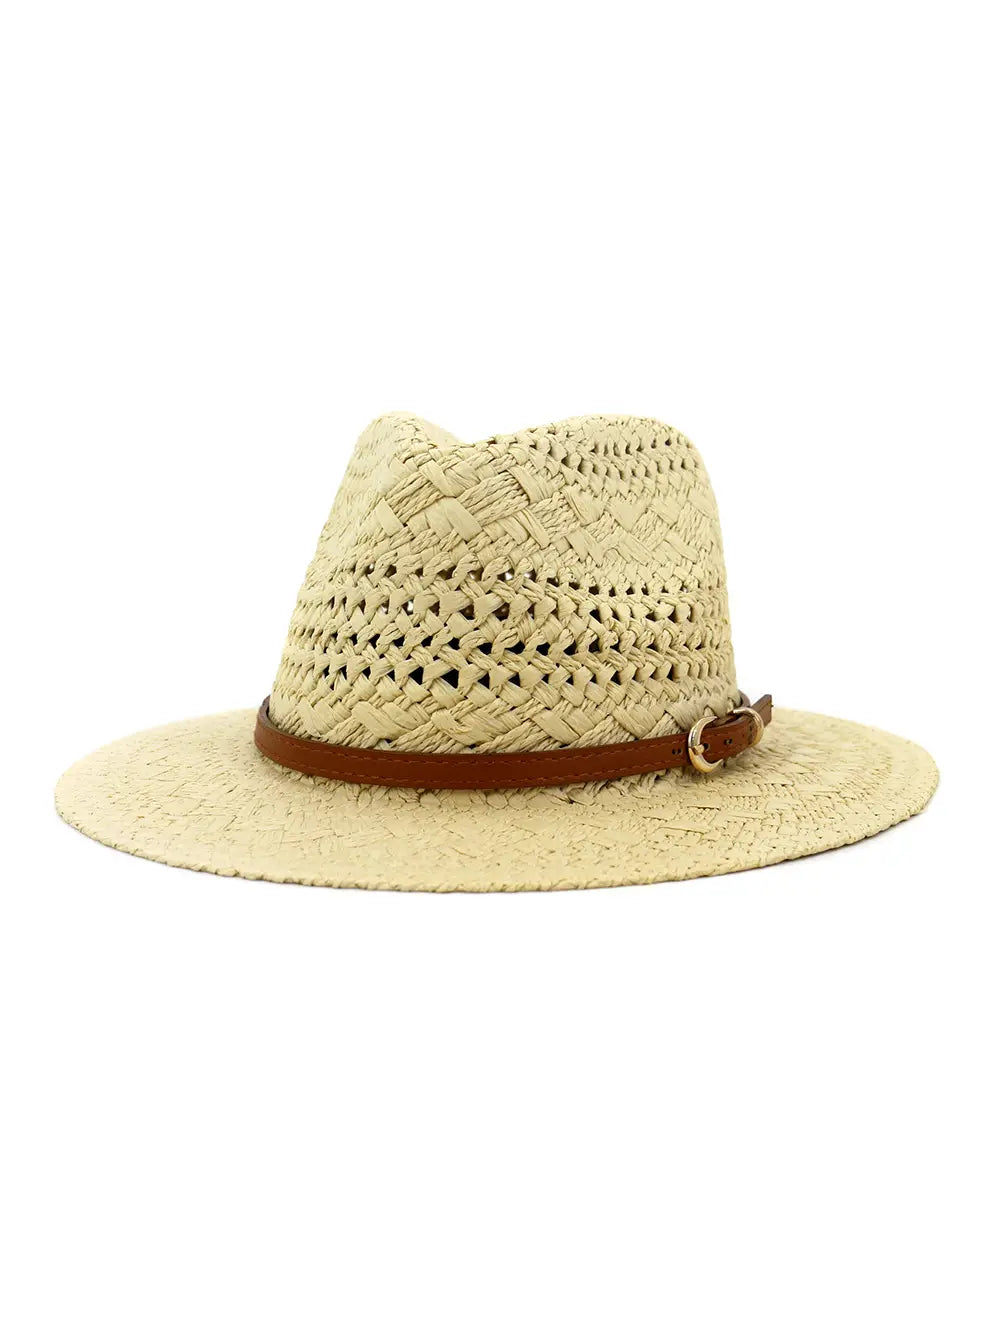 Spring Woven Straw Hat